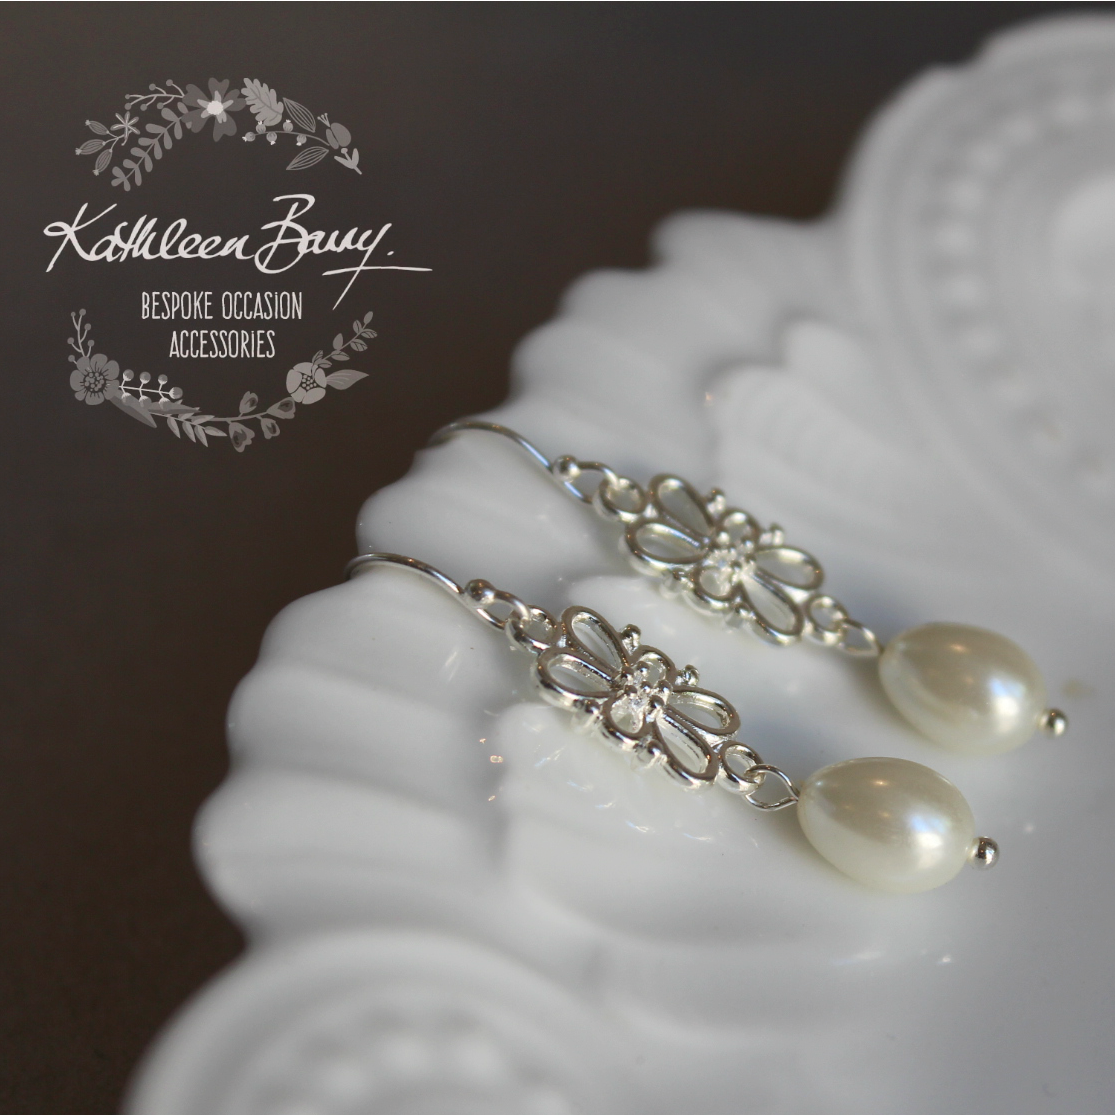 Lulu dainty silver plated pearl drop bridal earrings - Bridesmaid gift - option silver only